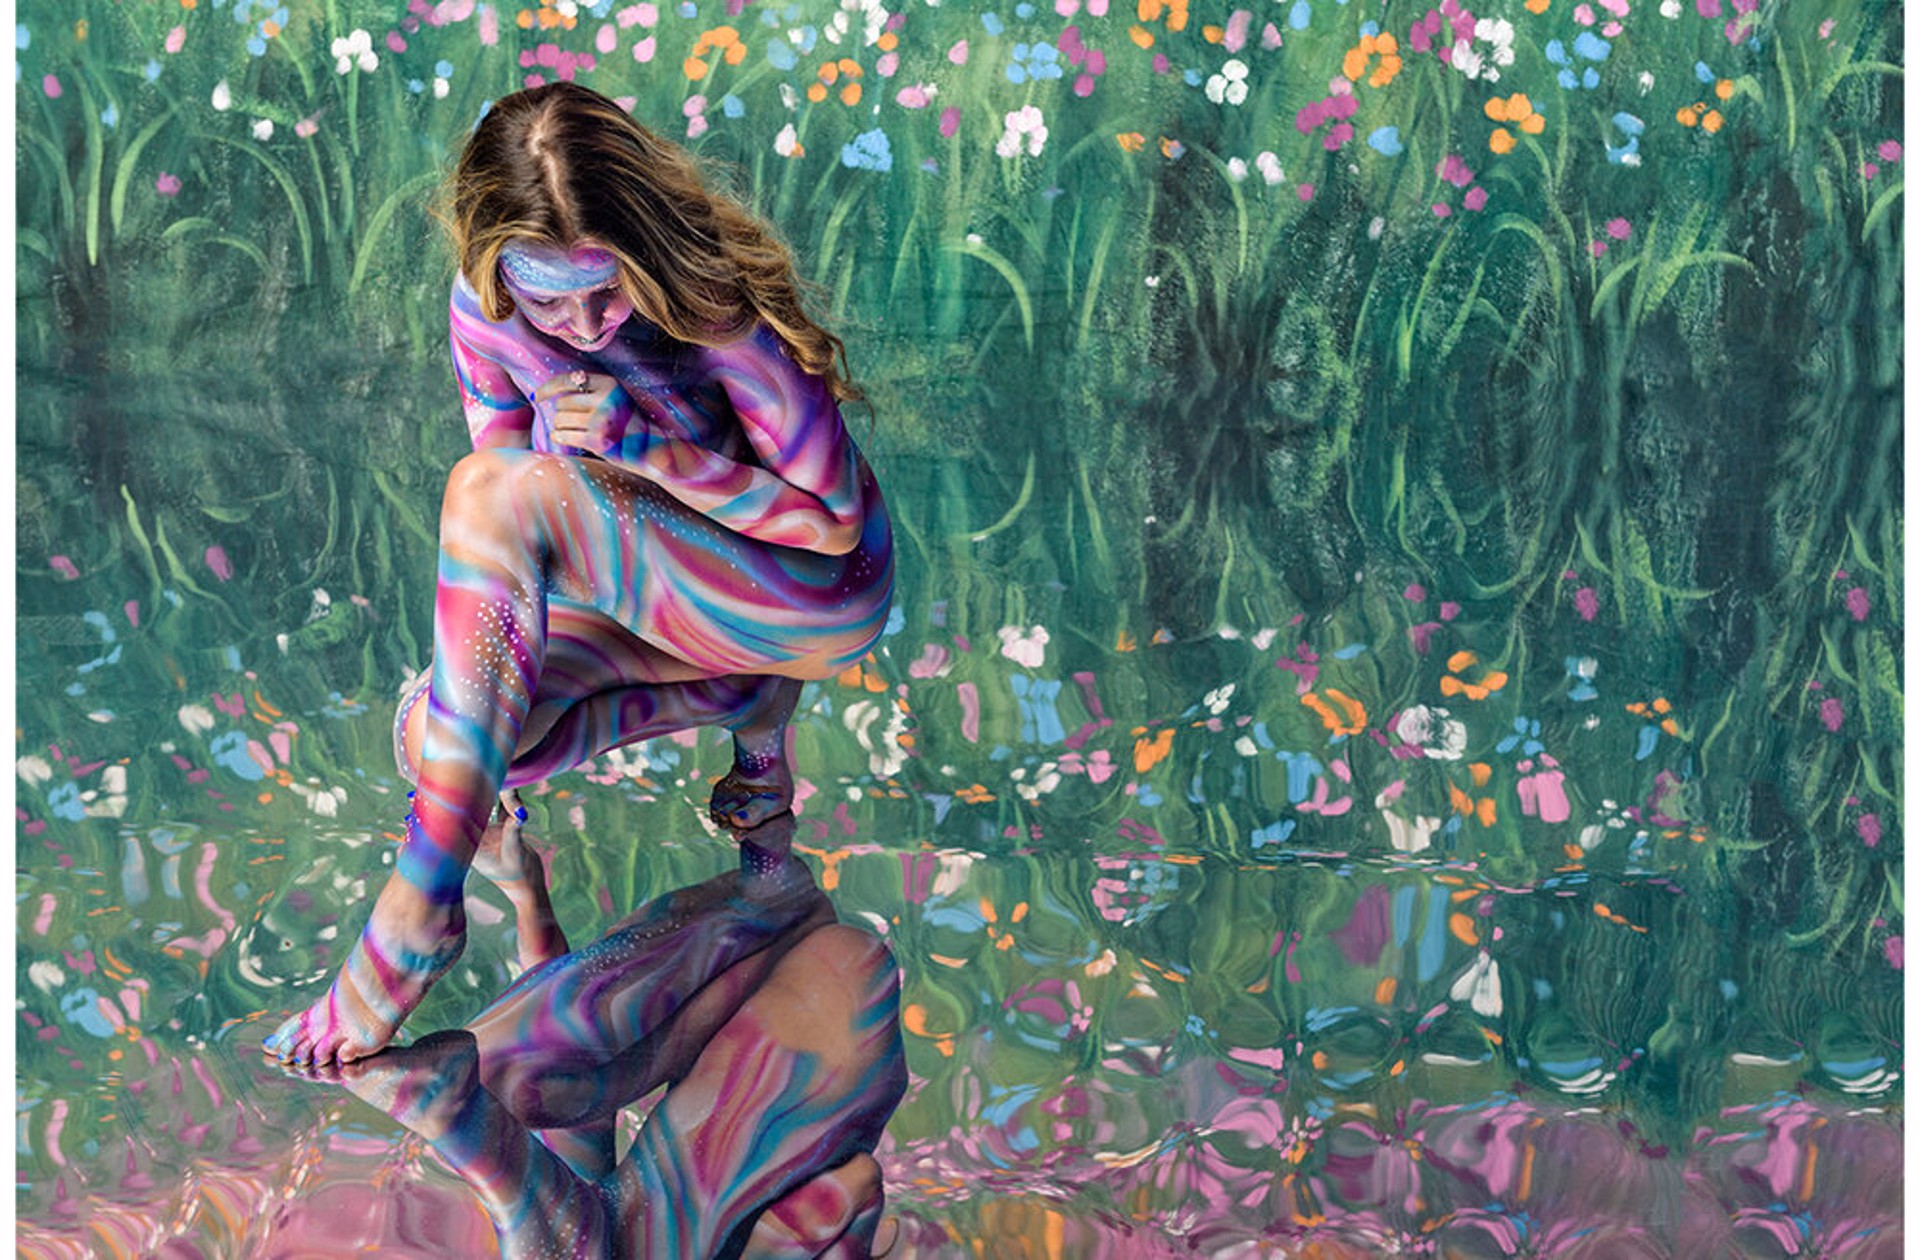 Human Canvas - Monet Inspired IV by Wesley Channell